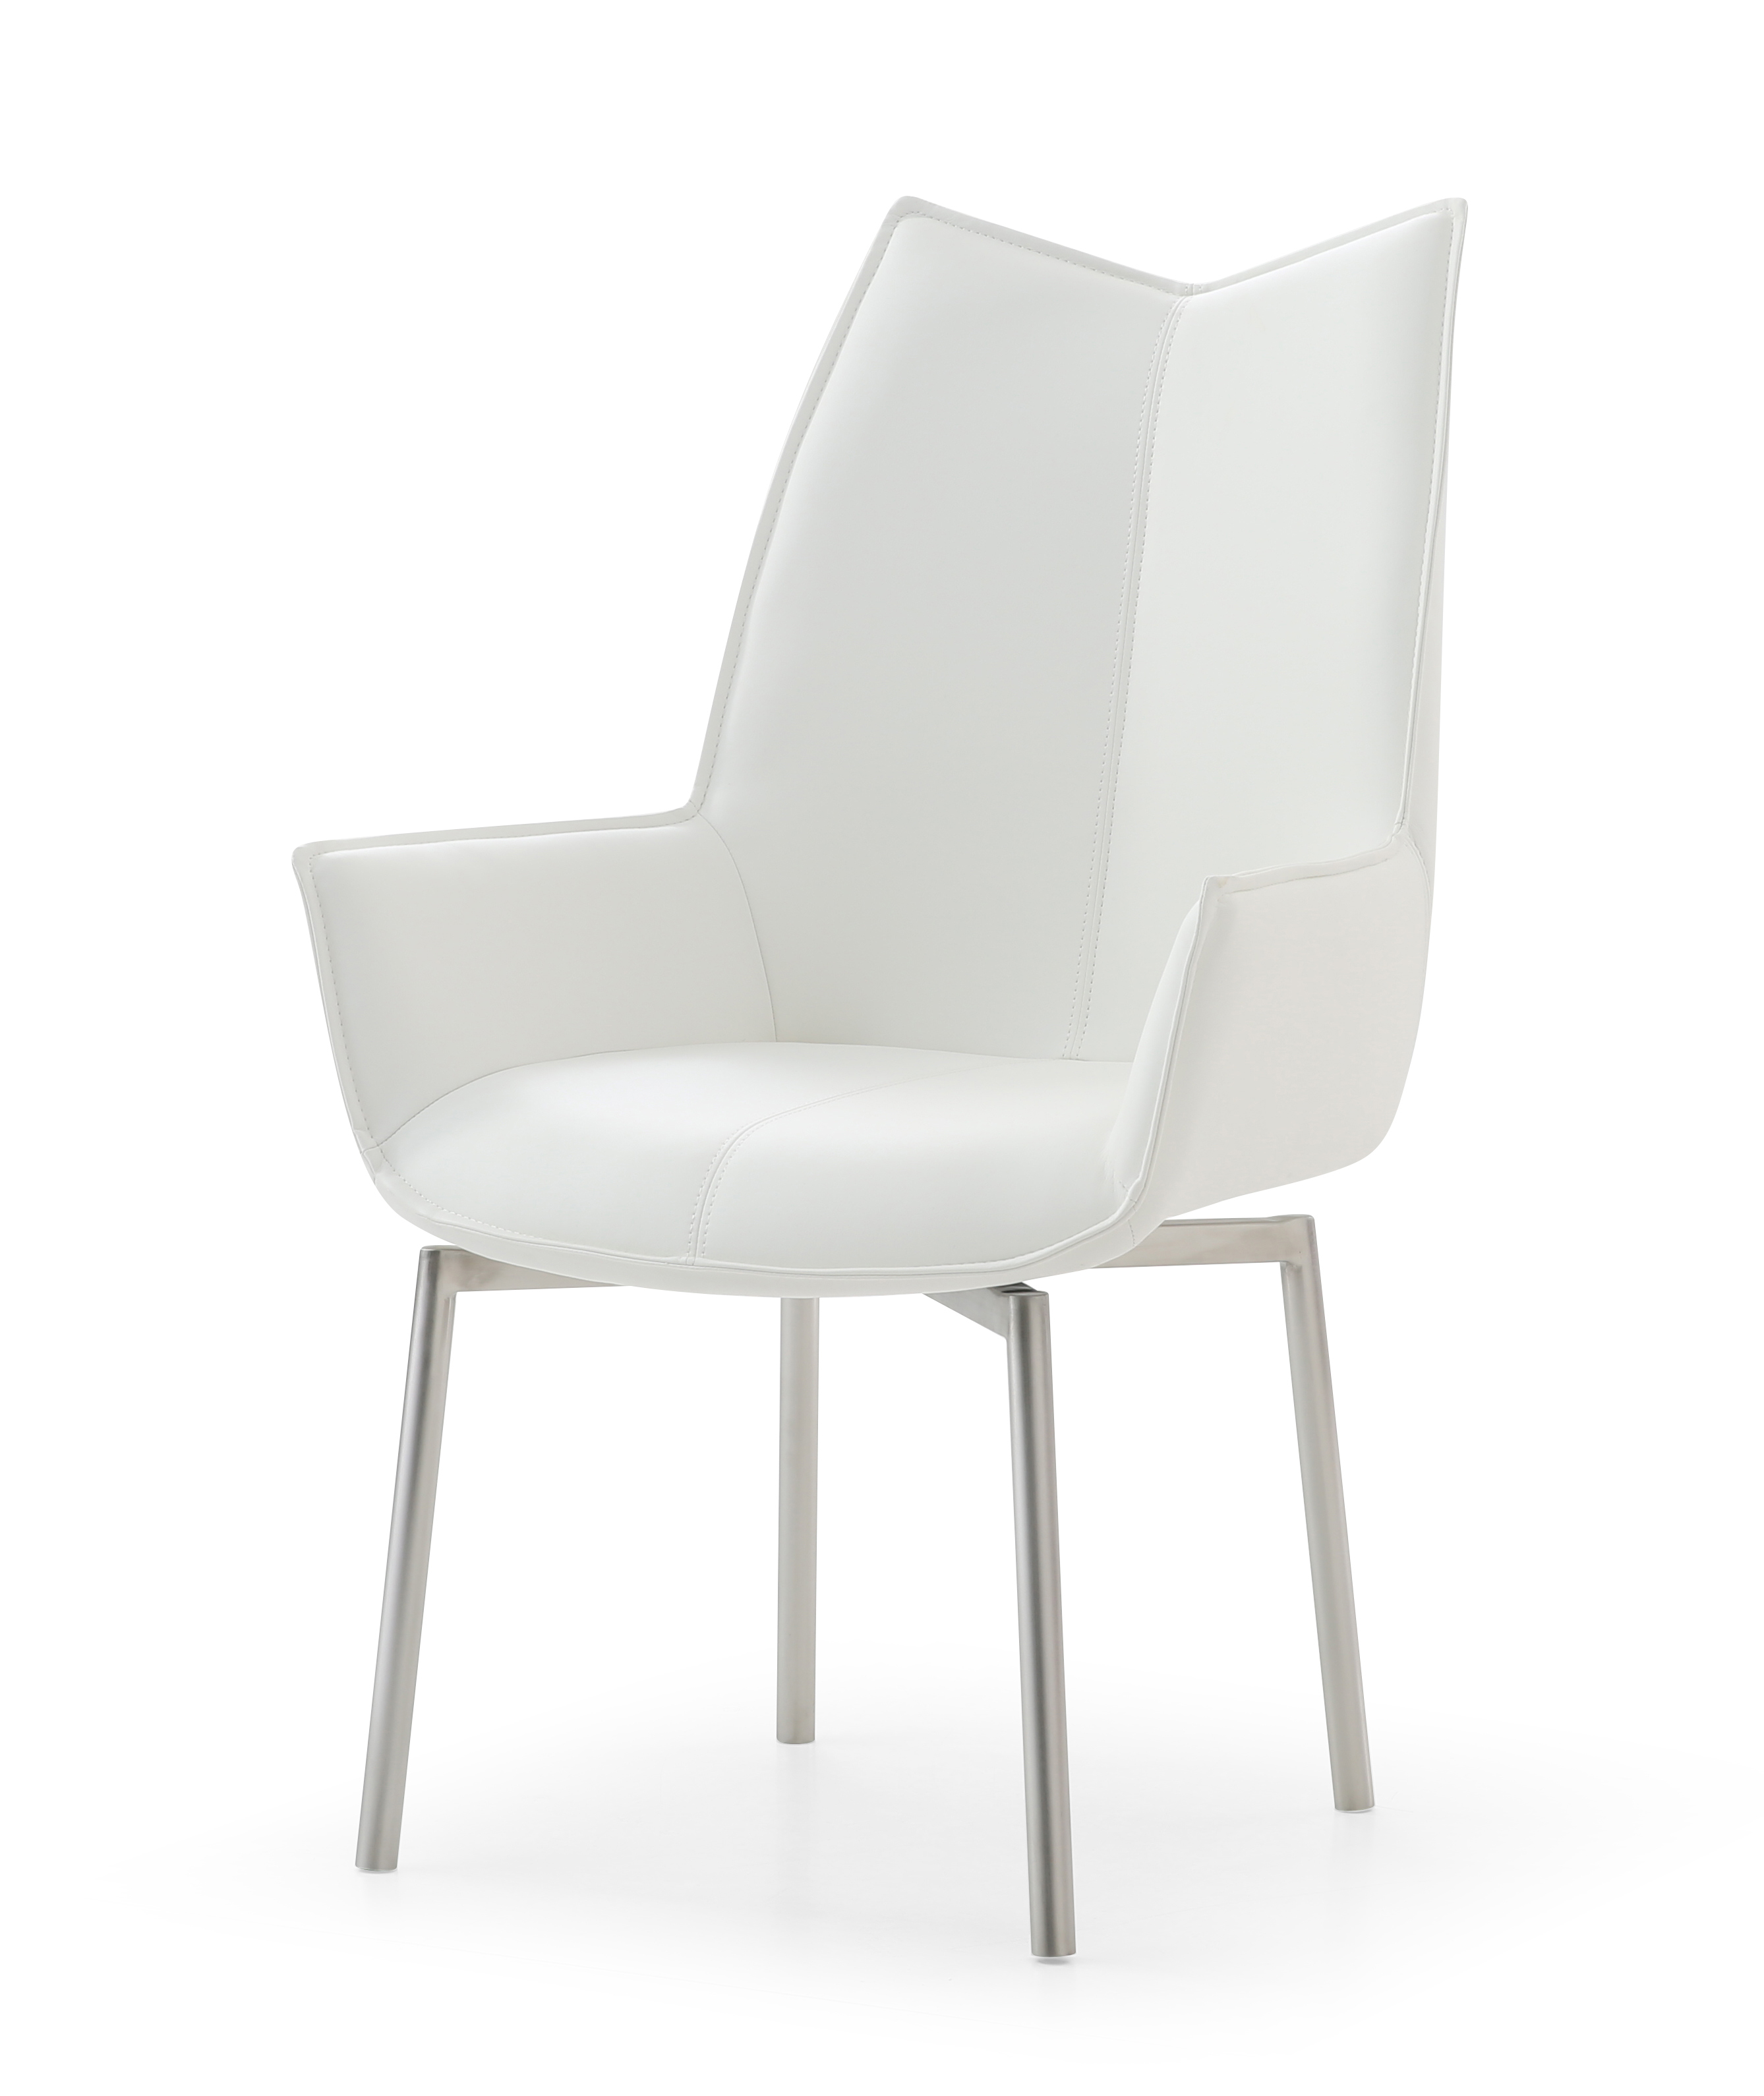 Dining Room Furniture Chairs 1218 swivel dining chair White